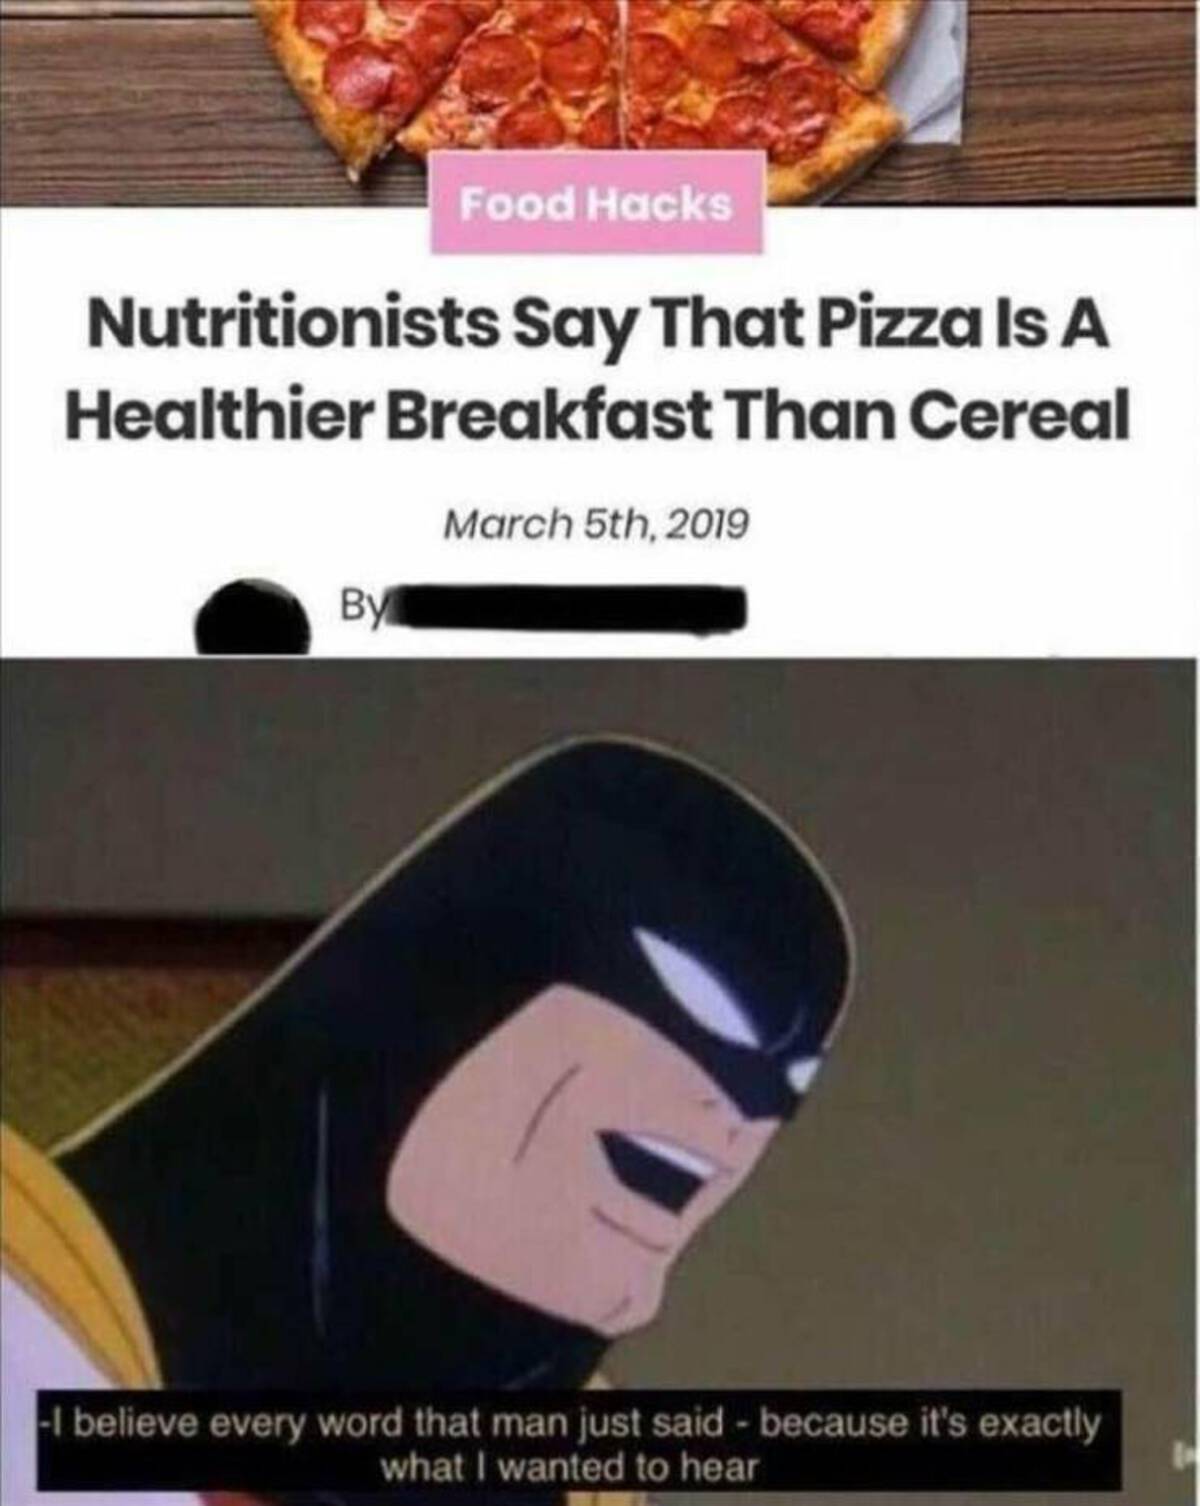 Food - Food Hacks Nutritionists Say That Pizza Is A Healthier Breakfast Than Cereal By March 5th, 2019 I believe every word that man just said because it's exactly what I wanted to hear